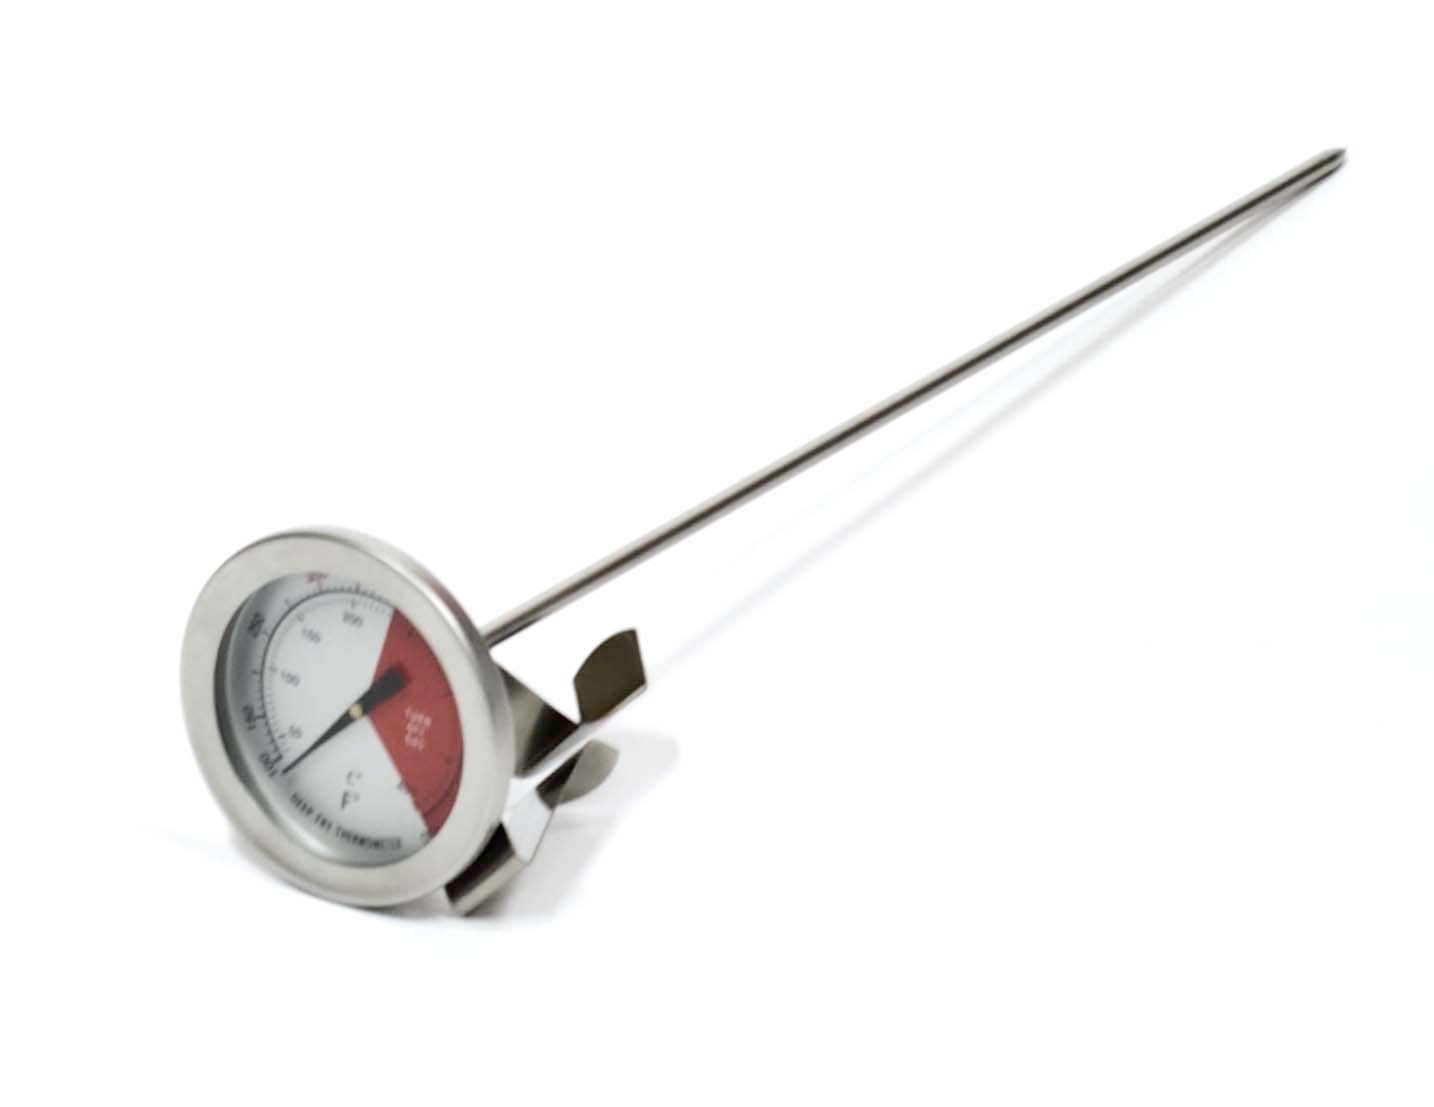 deep fry thermometer reviews